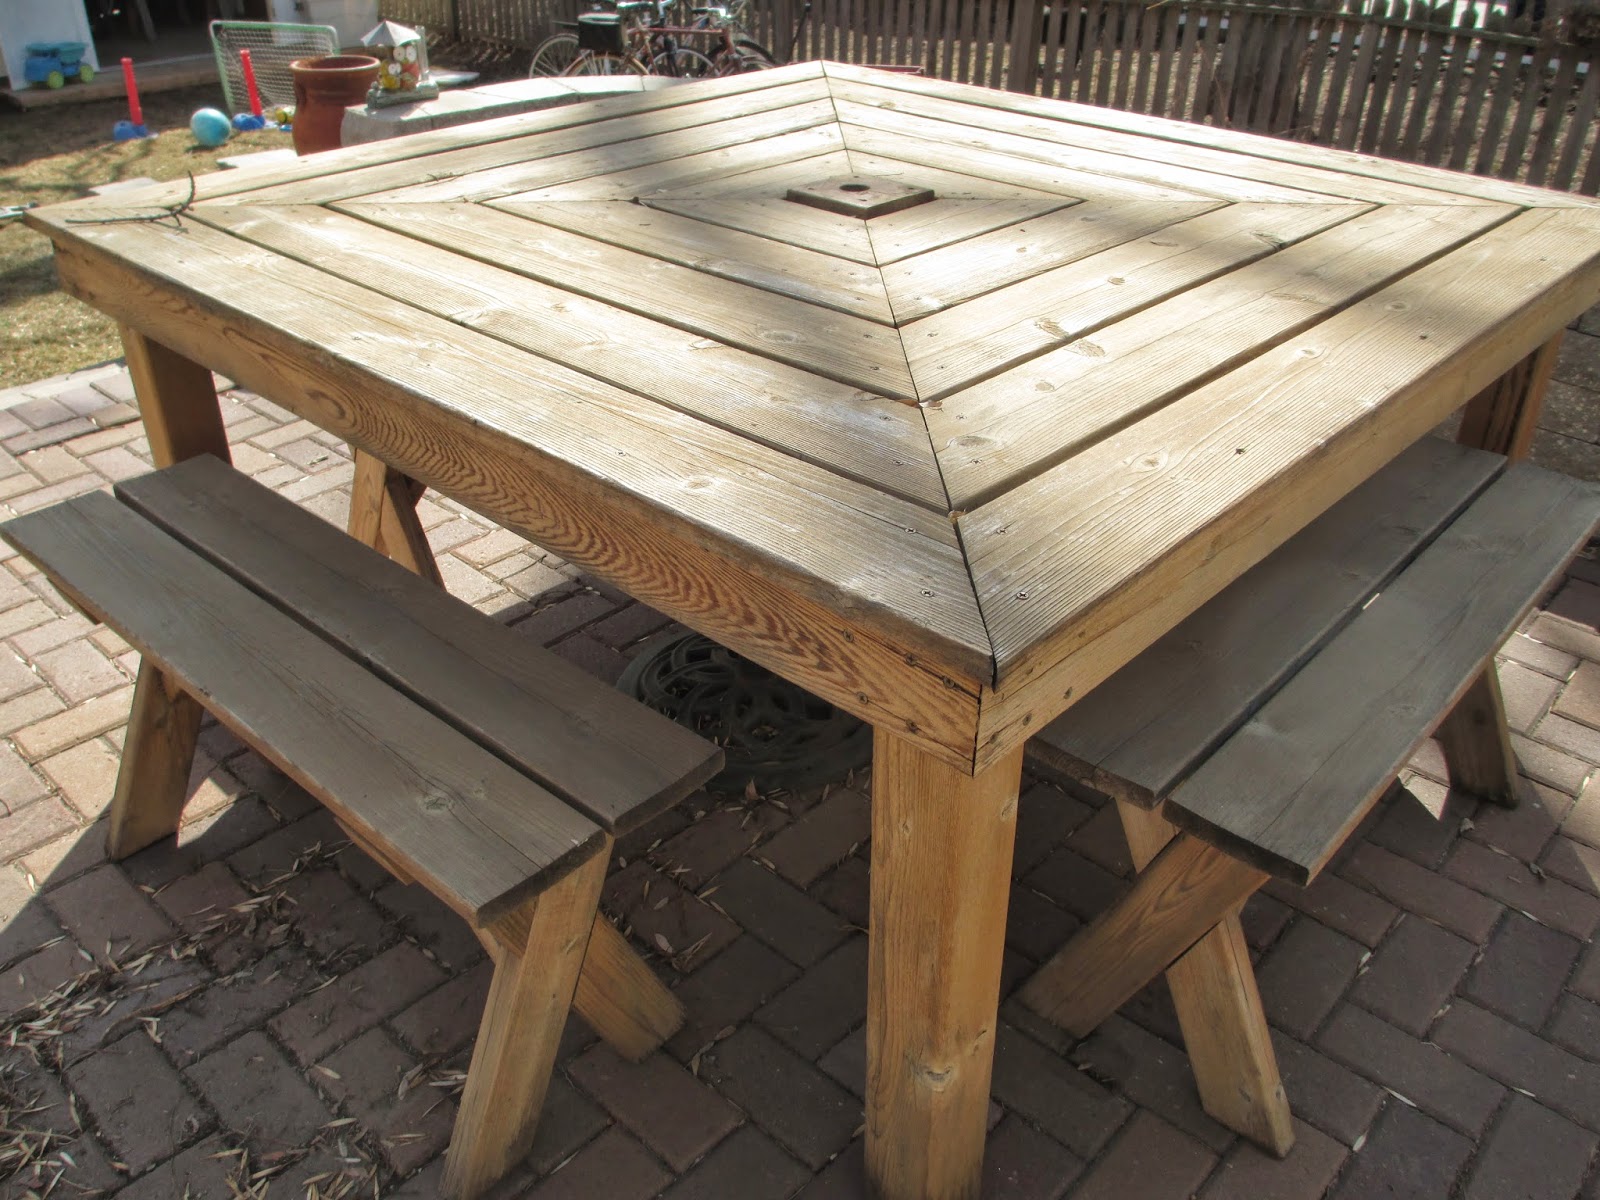 KRUSE'S WORKSHOP: How (Not) To Refresh Your Outdoor Patio ...